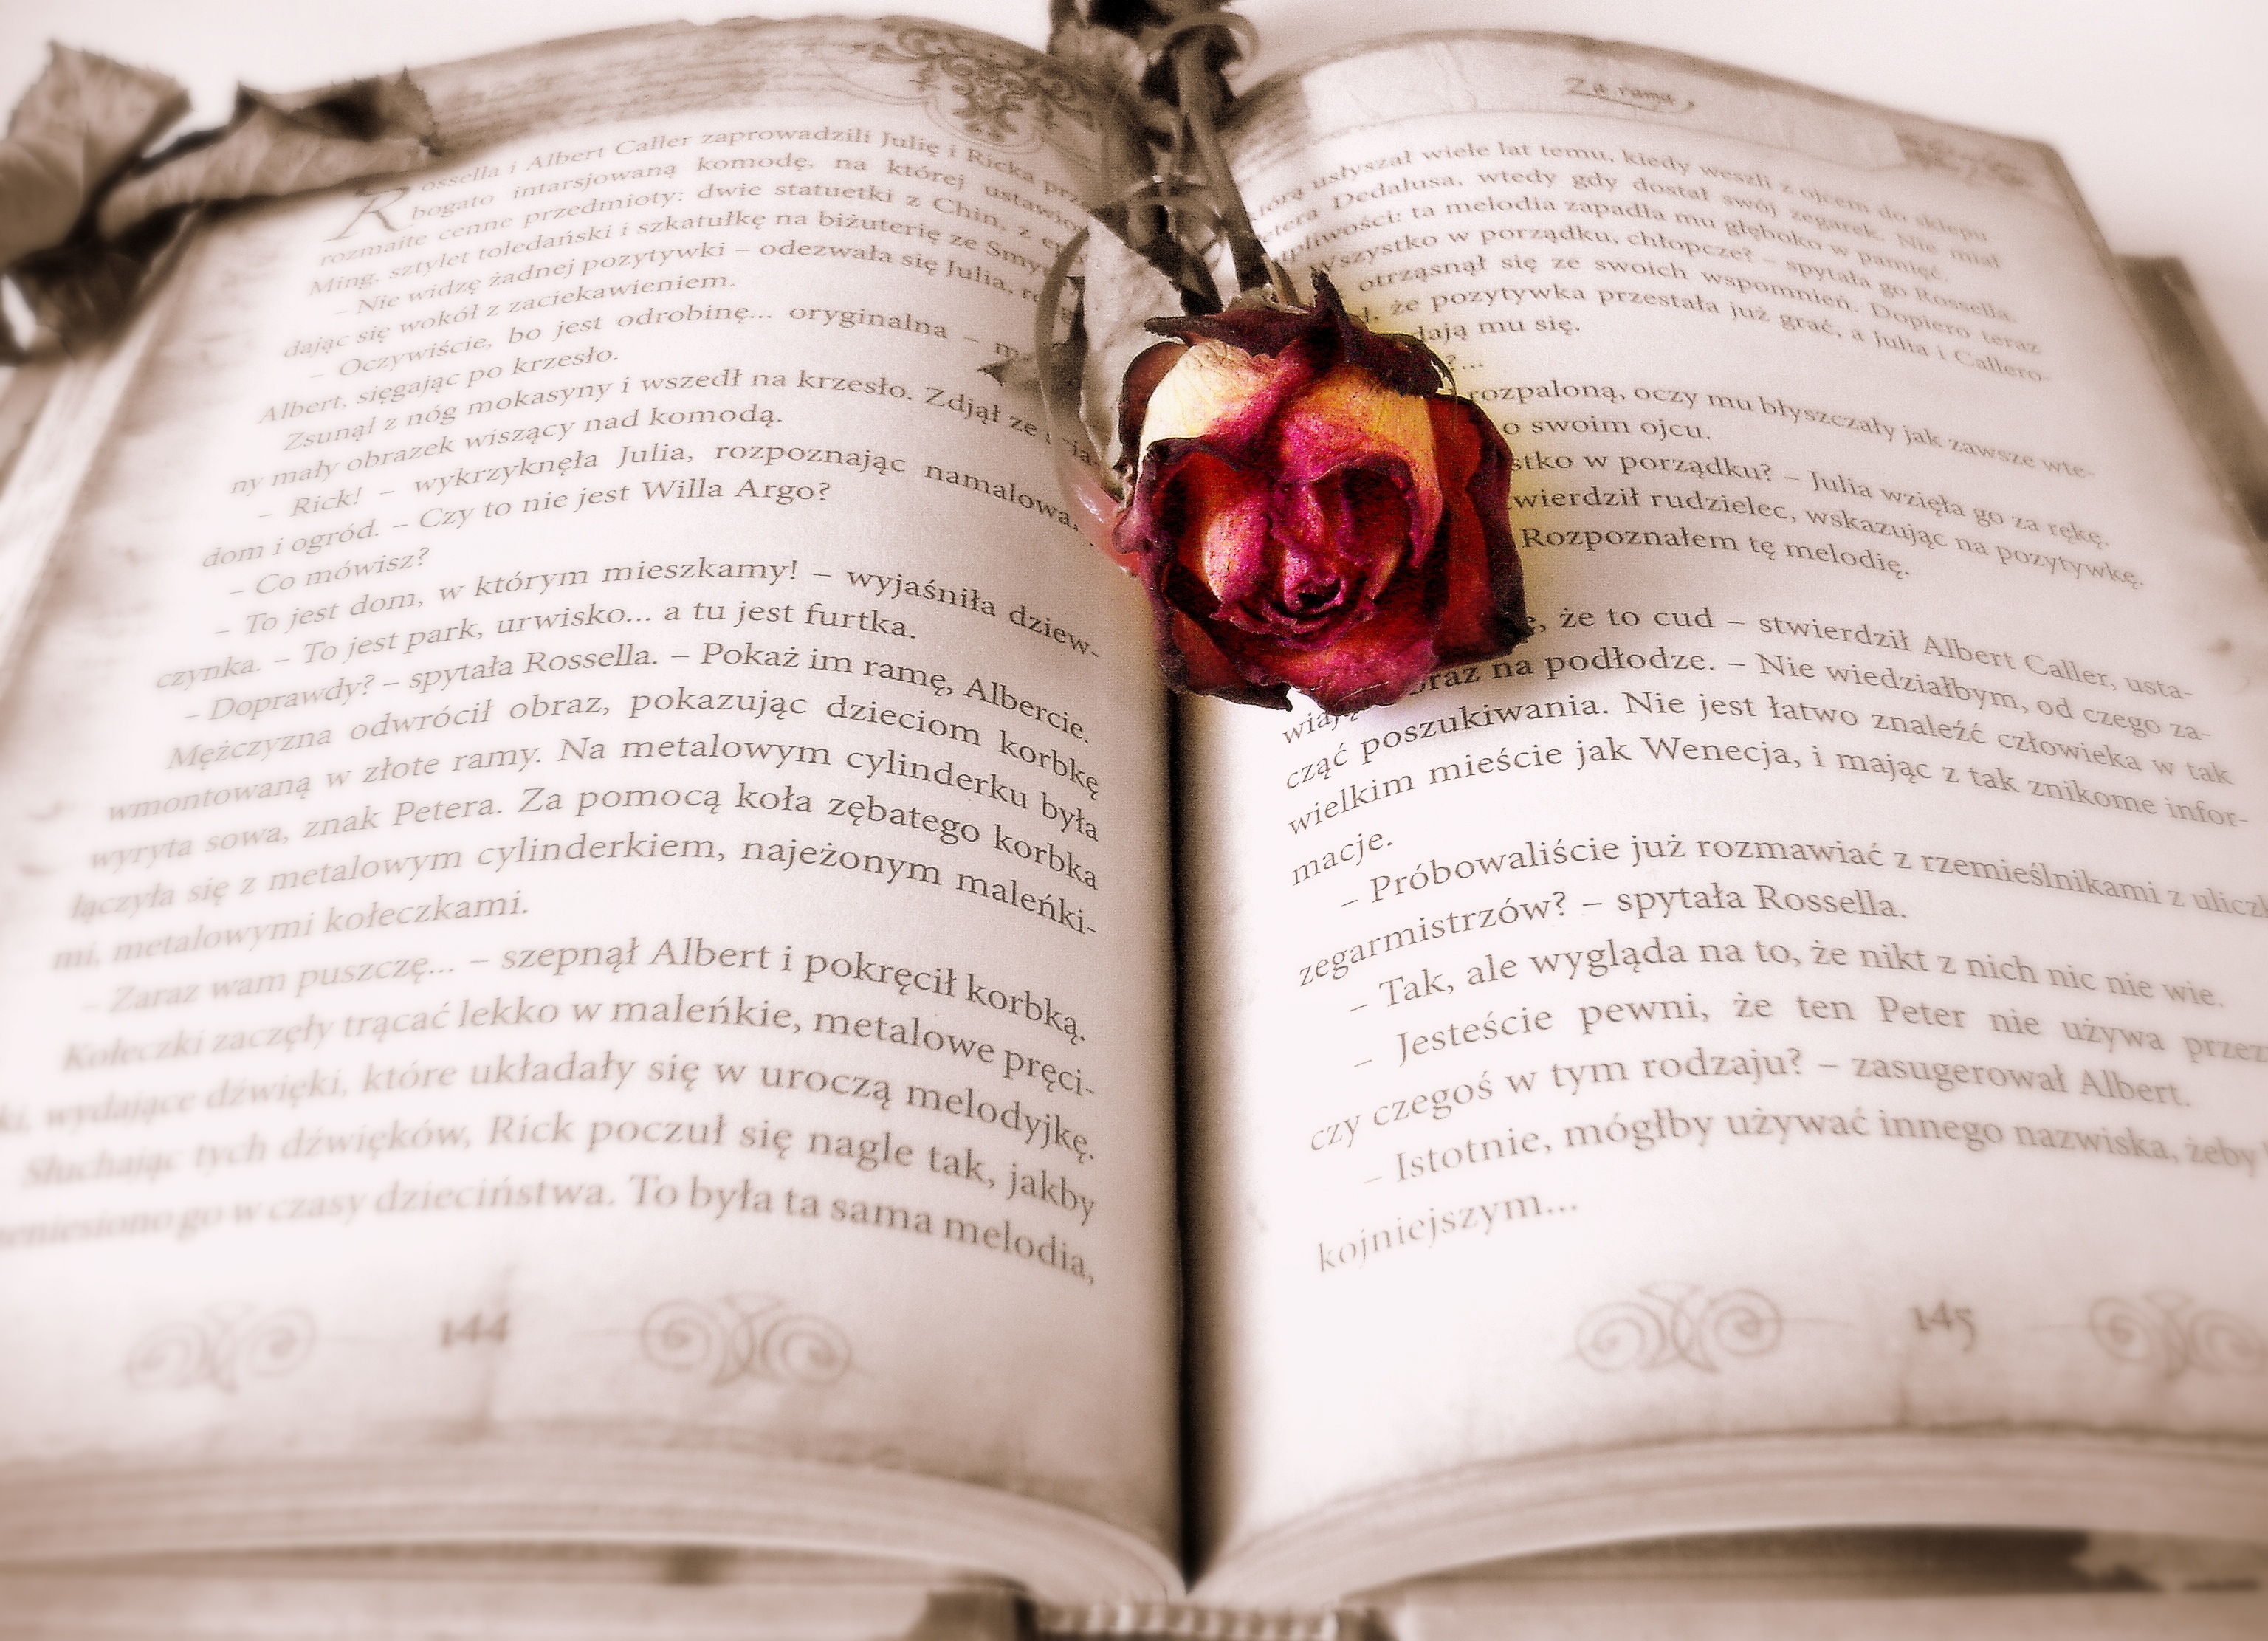 A dried rose in an ancient book